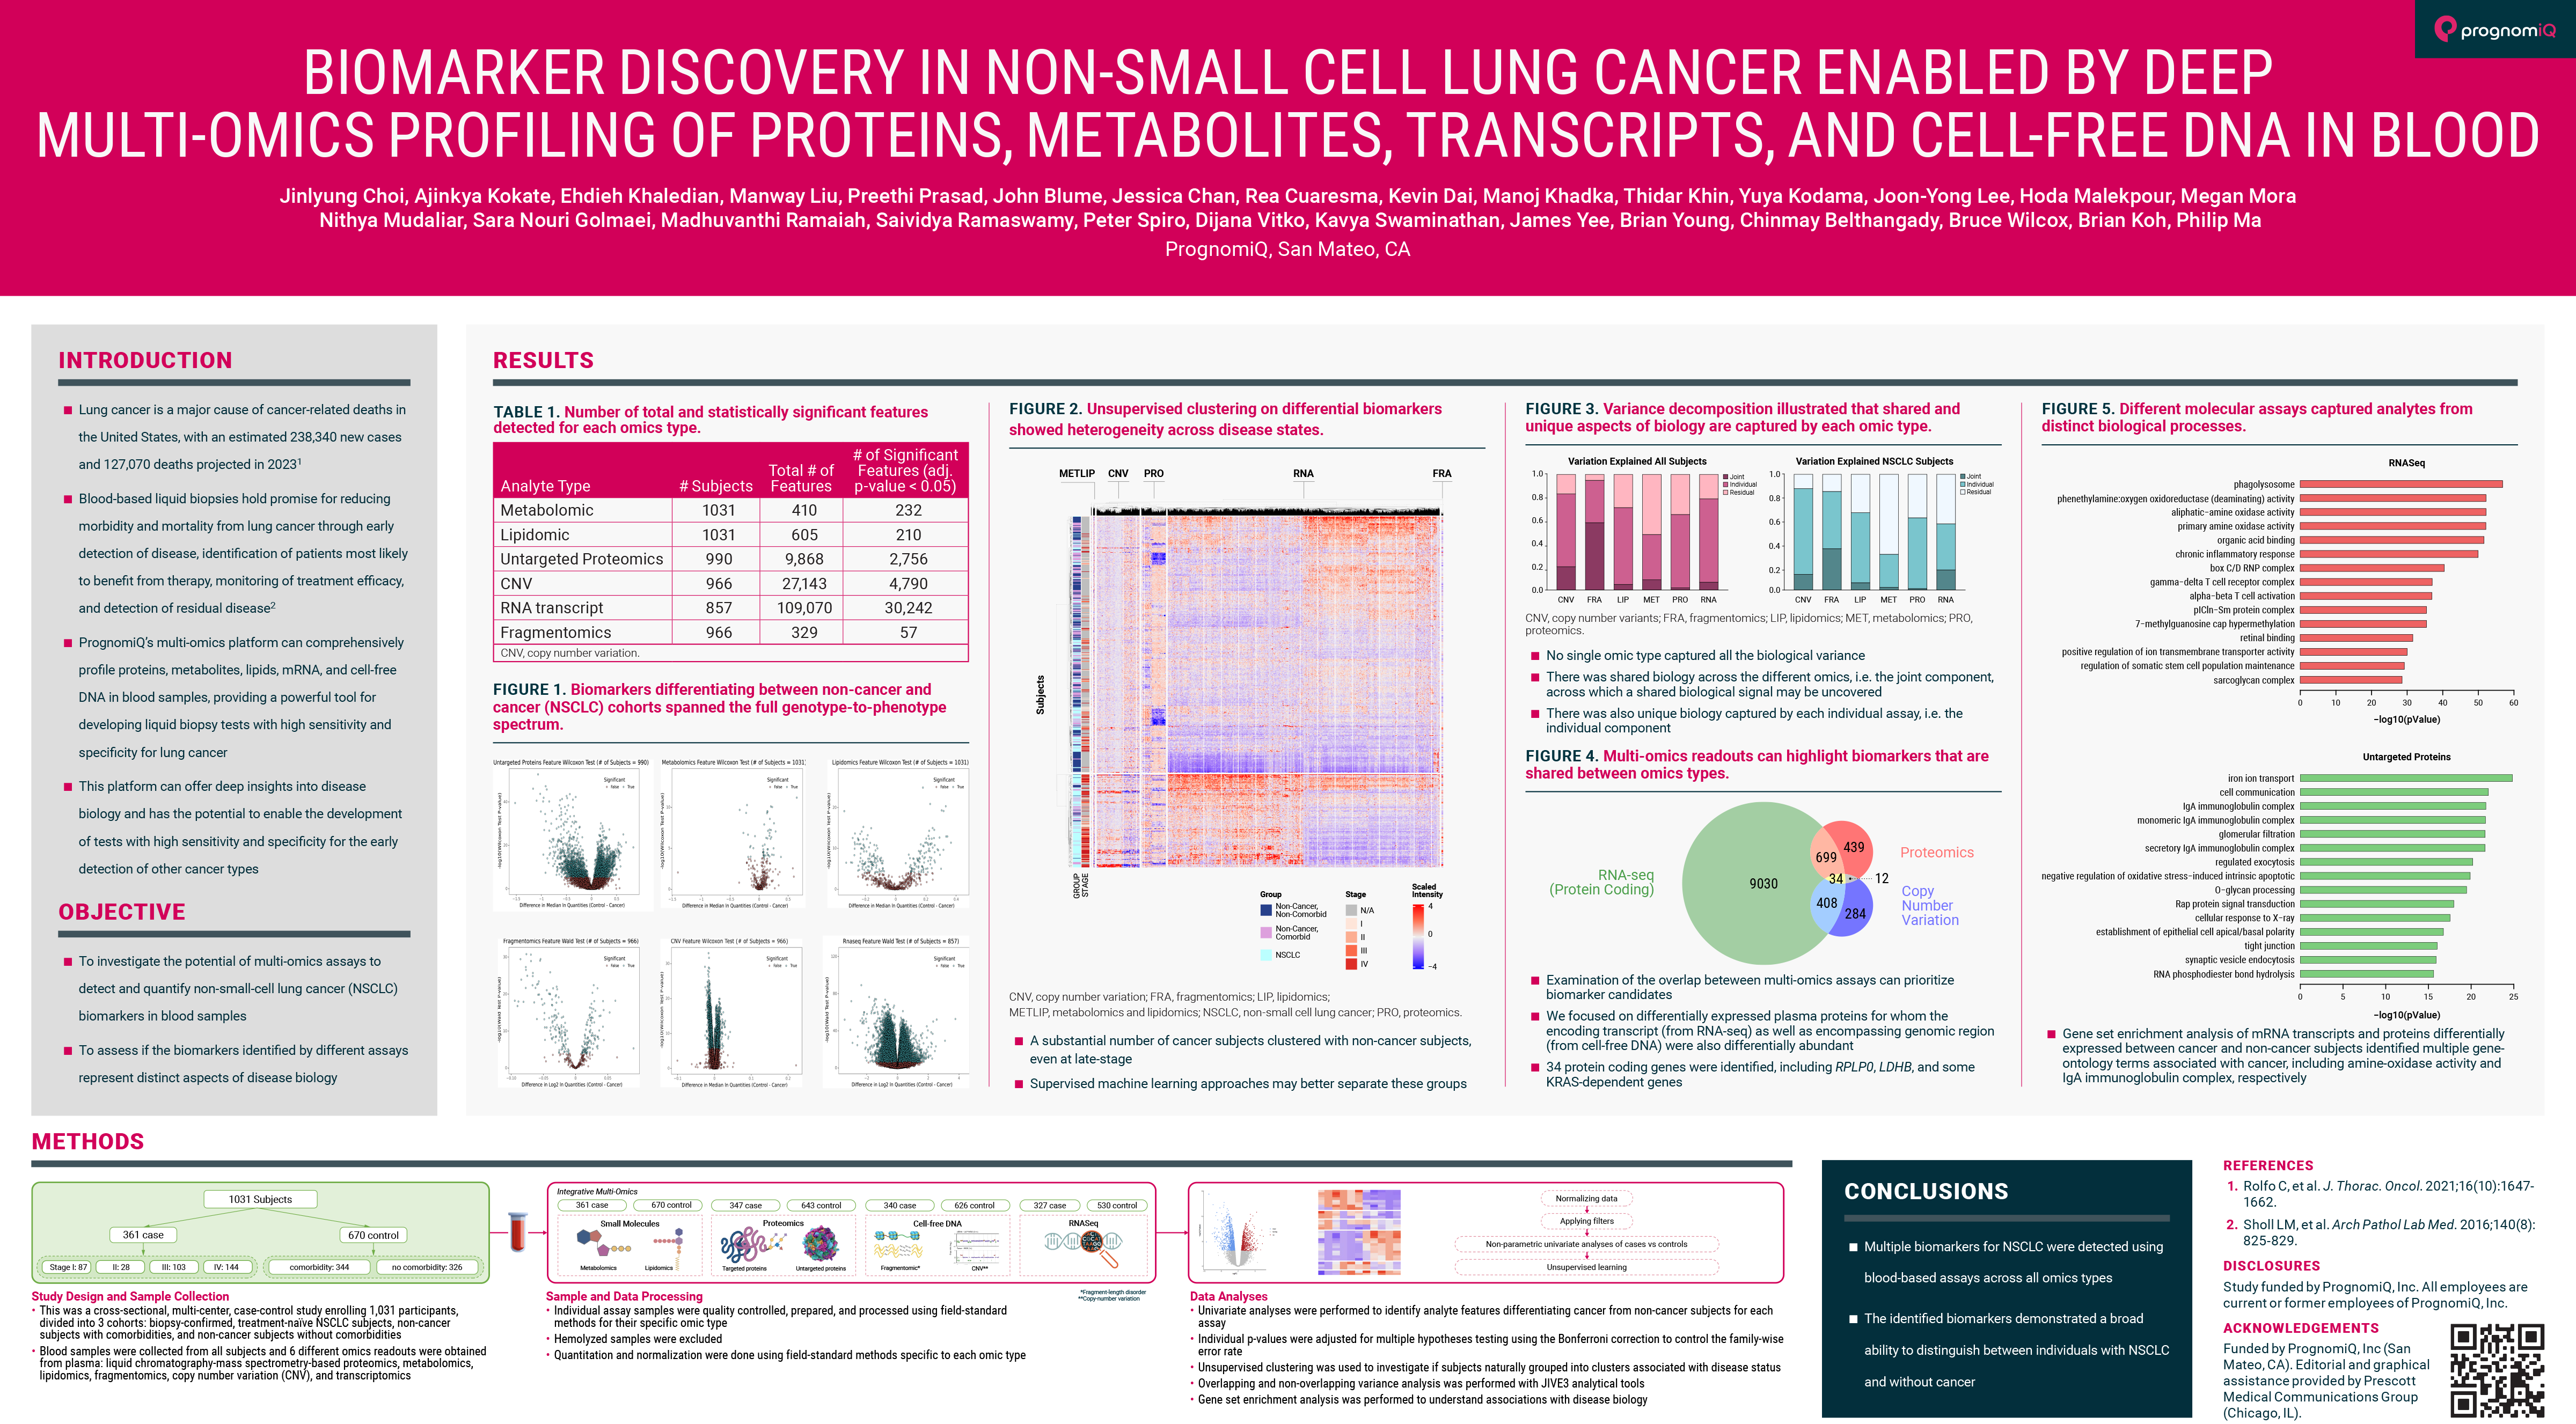 scientific poster showing a biomarker discovery in non-small cell lung cancer enabled by deep multi‑omics profiling of proteins, metabolites, transcripts, and cell-free dna in blood